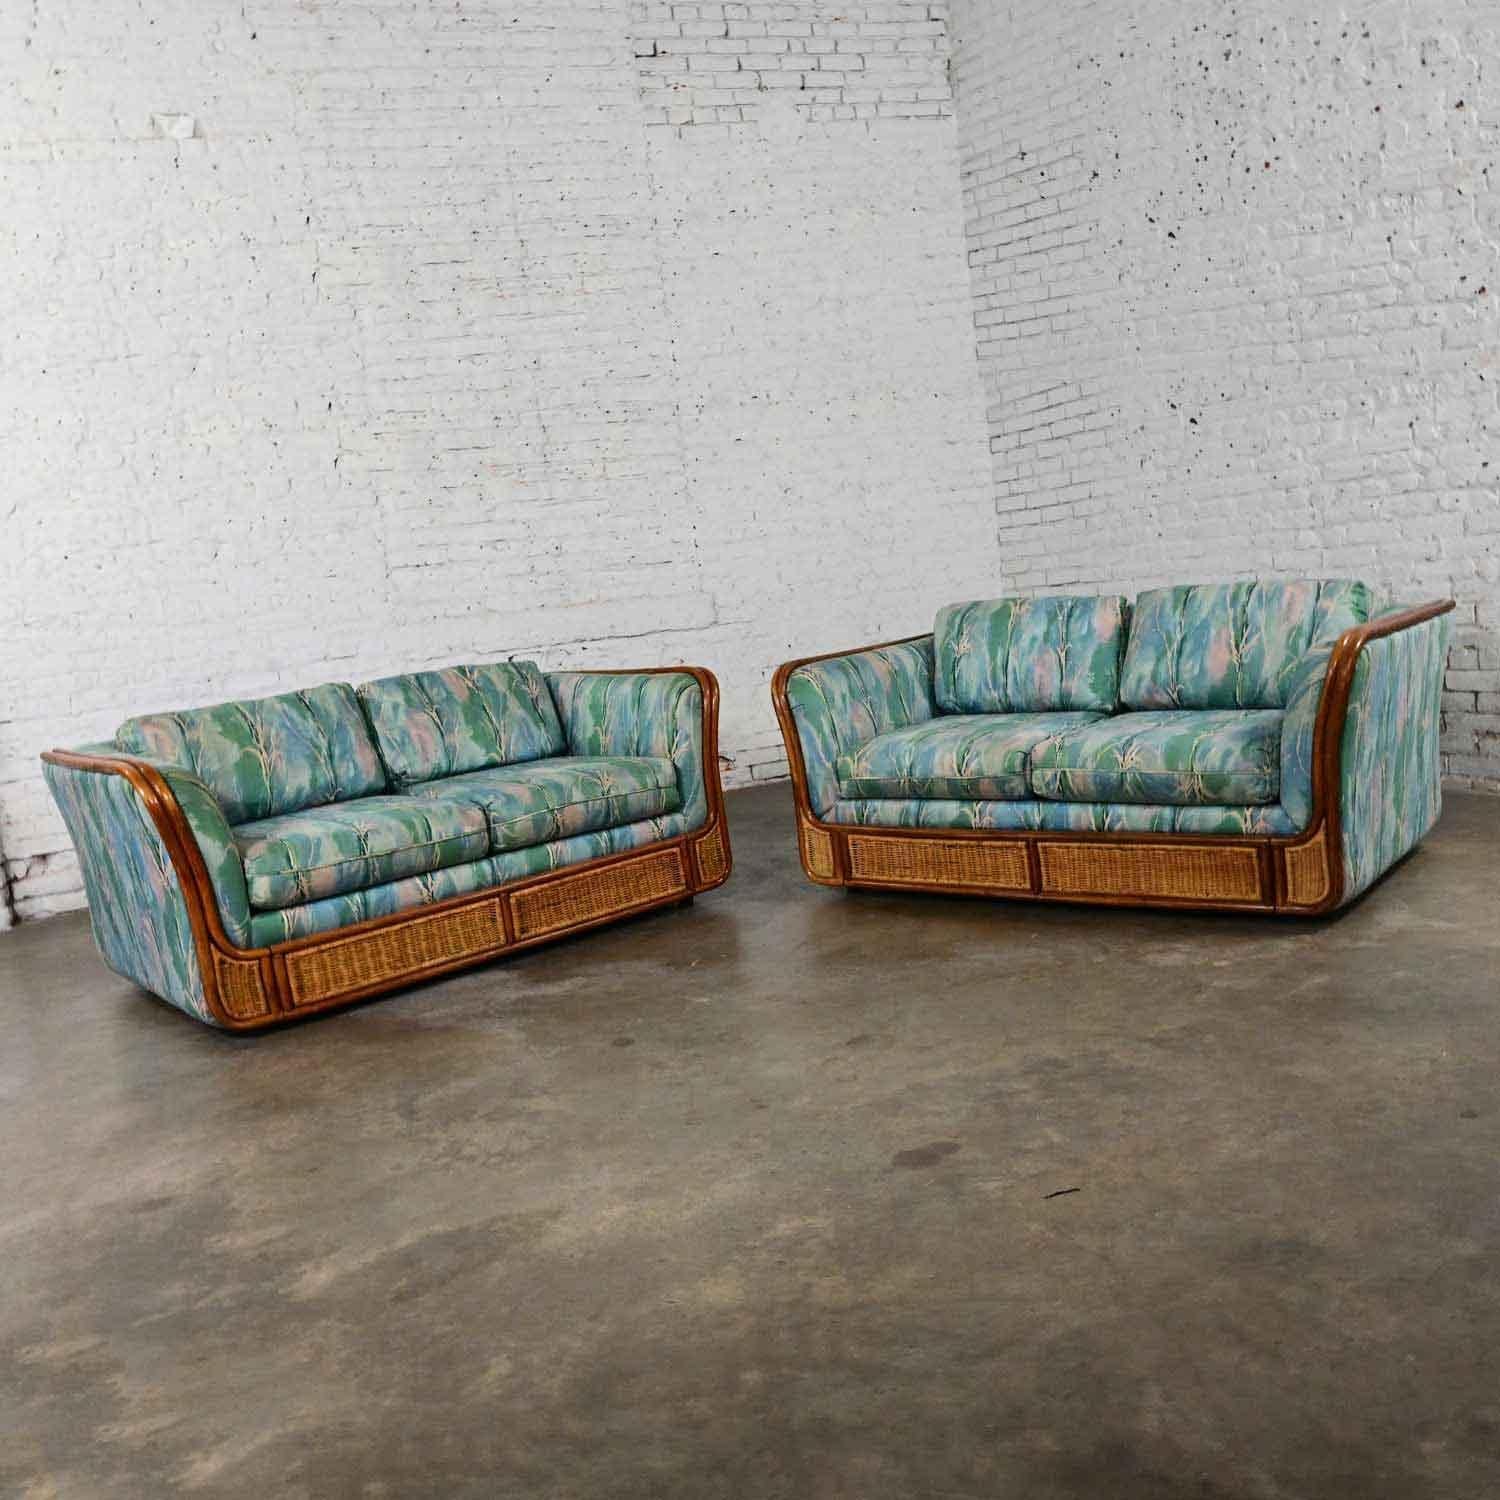 Late 20th Century Boho Chic Rattan & Wicker Tuxedo Style Upholstered Loveseats For Sale 2